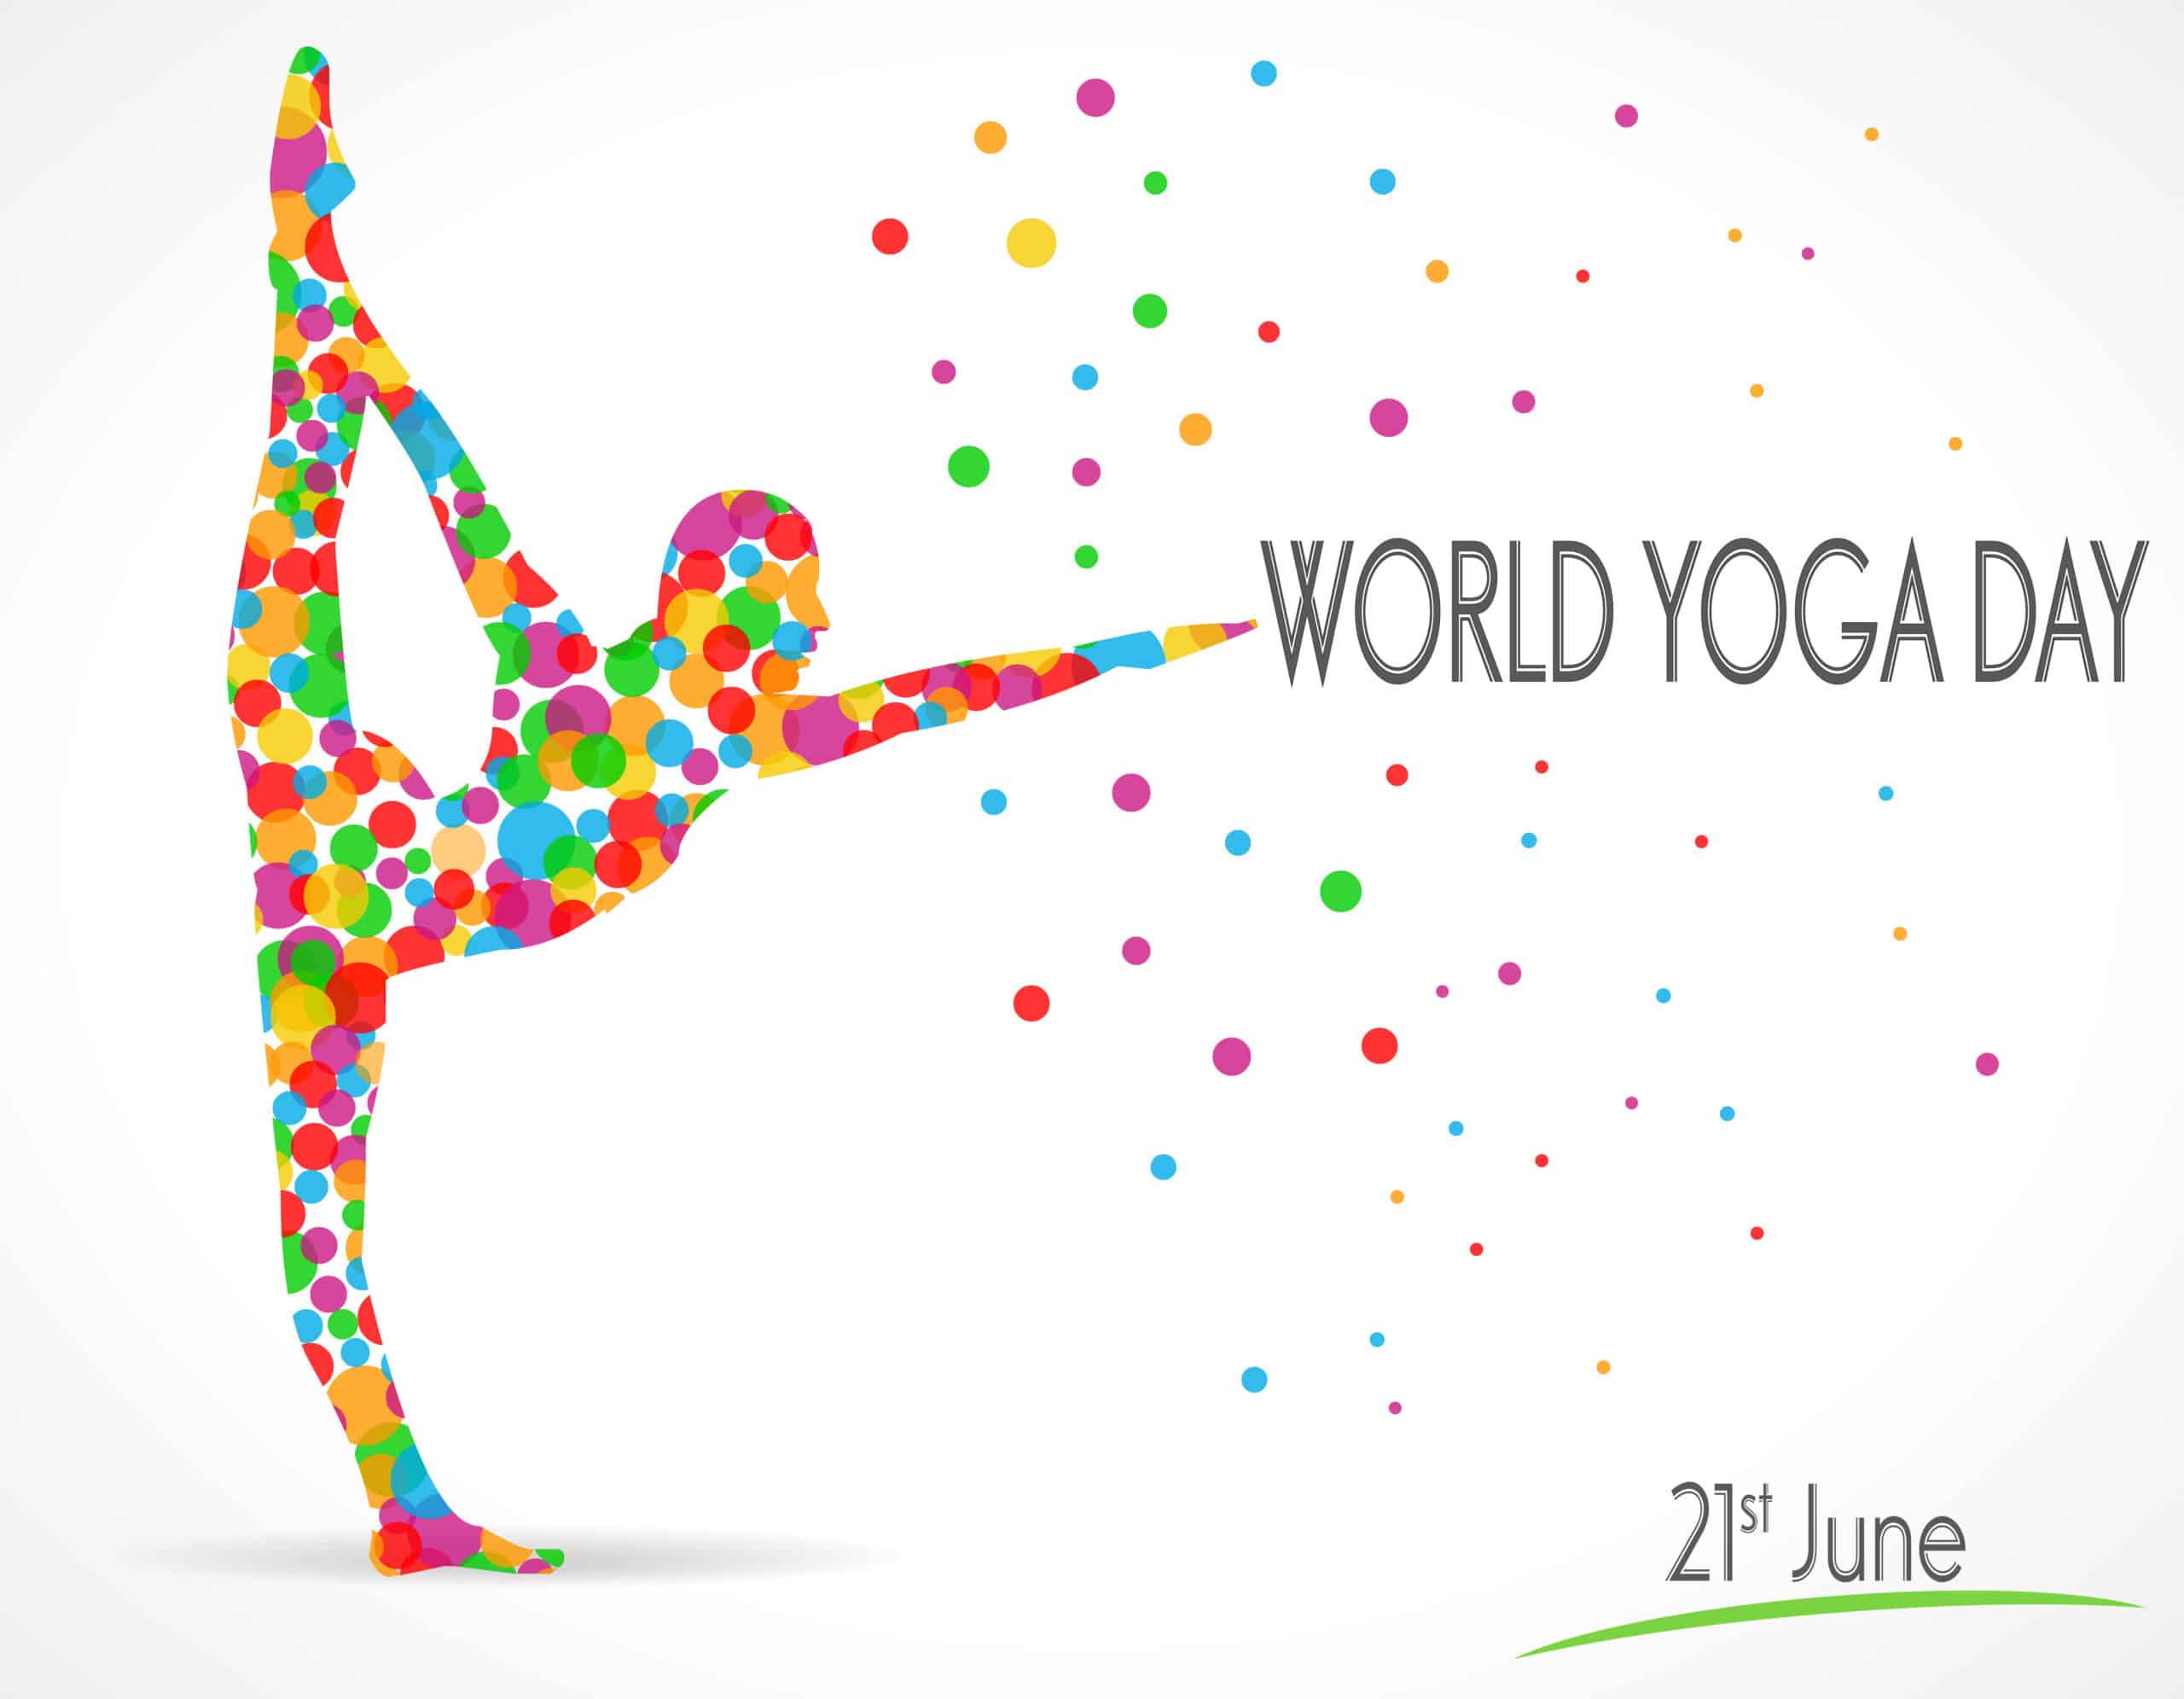 World Yoga Day special: How yoga changed my life